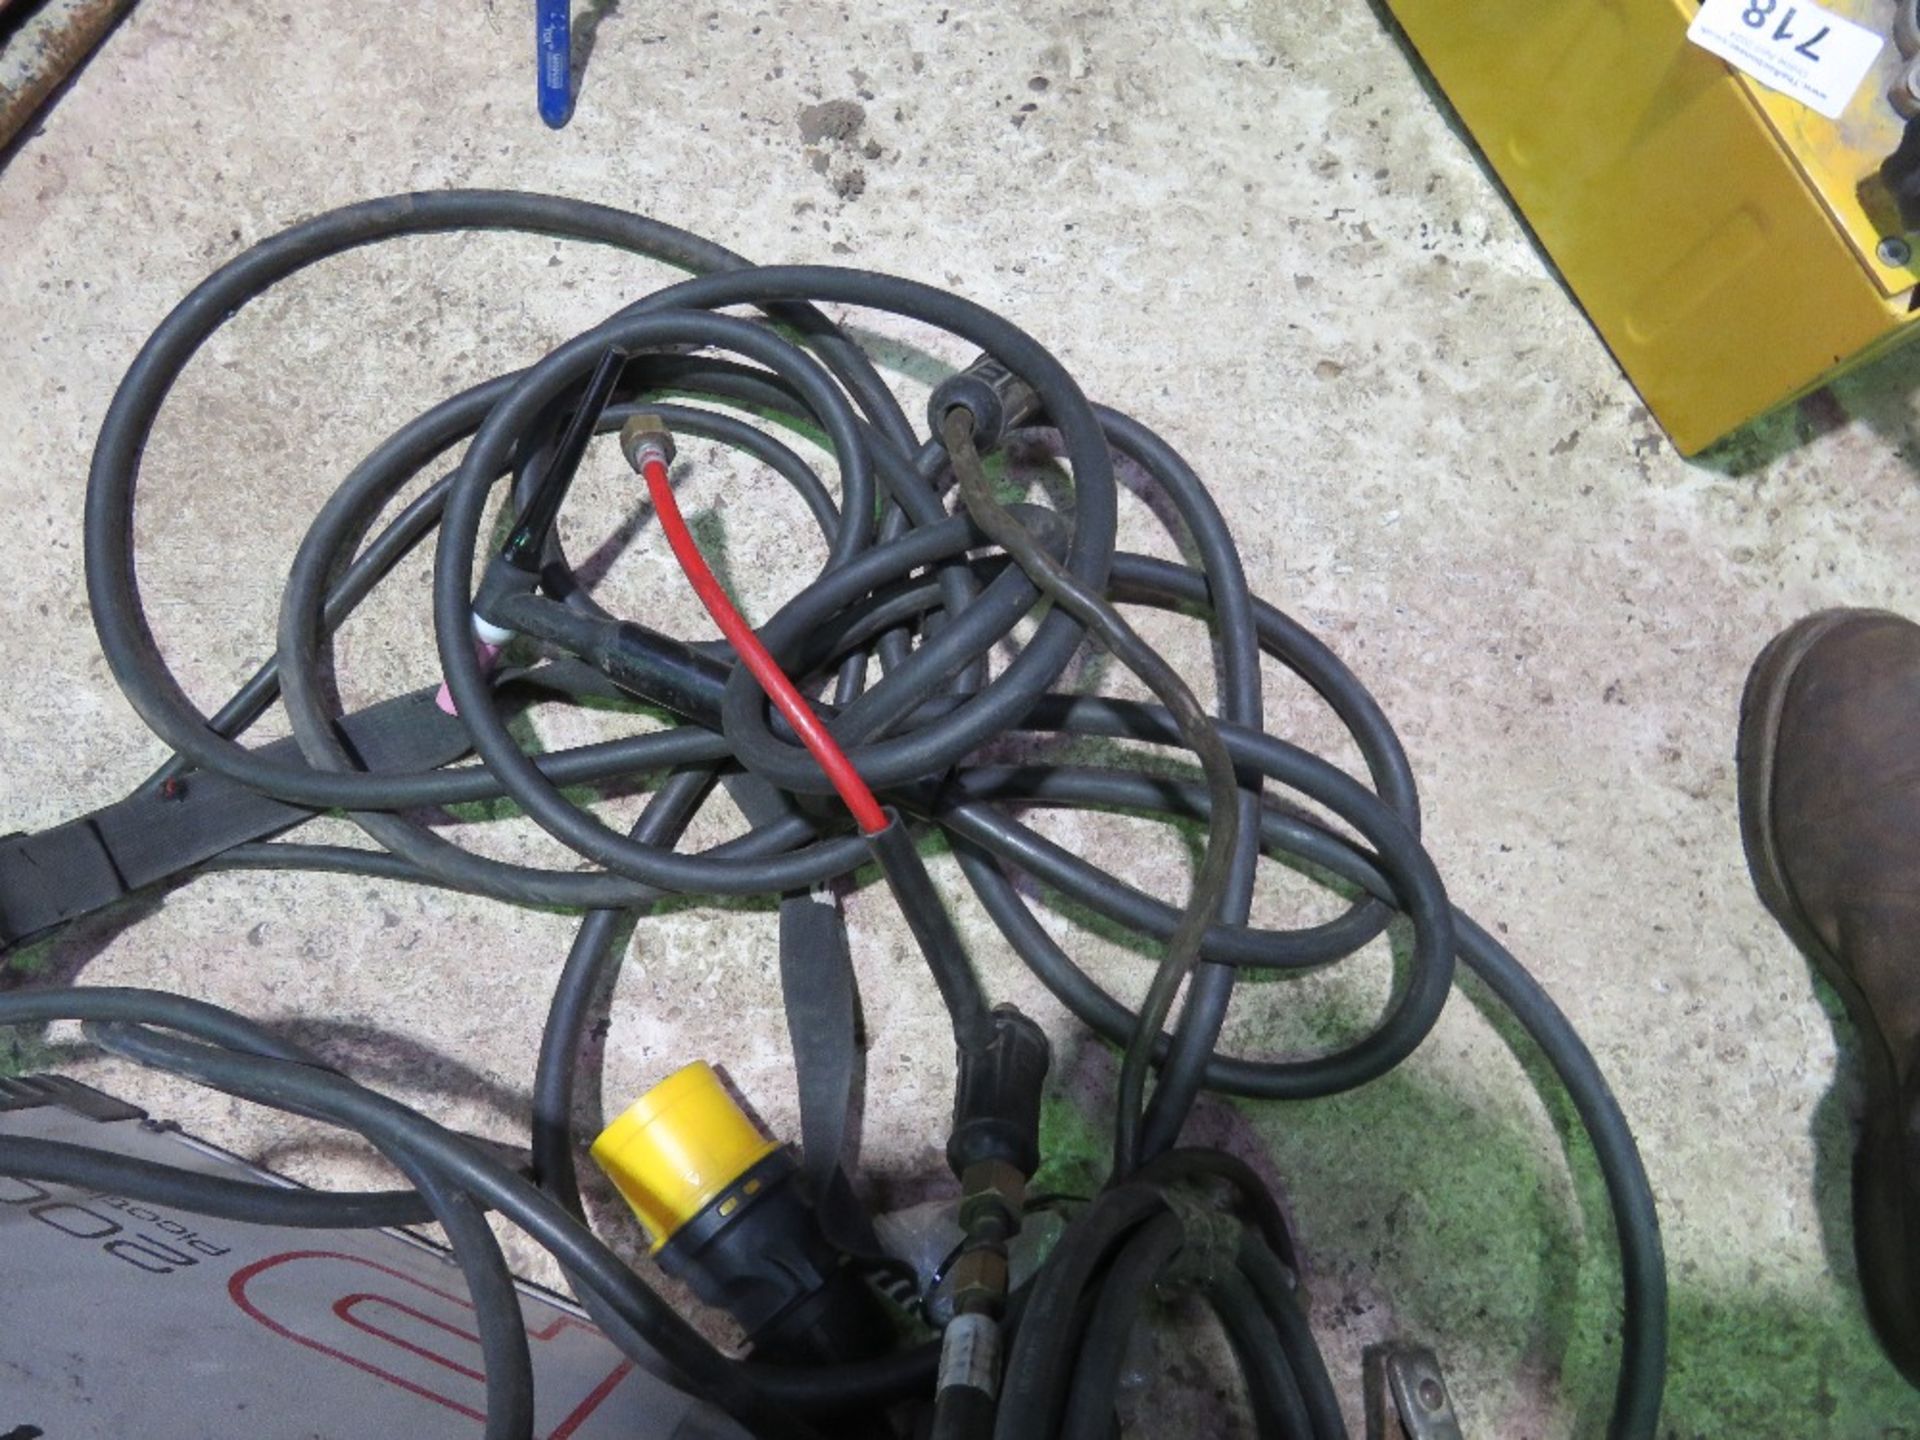 EWN P200 PICOTIG MV WELDER, 110VOLT WITH RODS PLUS 2 X HELMETS AS SHOWN.....THIS LOT IS SOLD UNDER T - Image 5 of 9